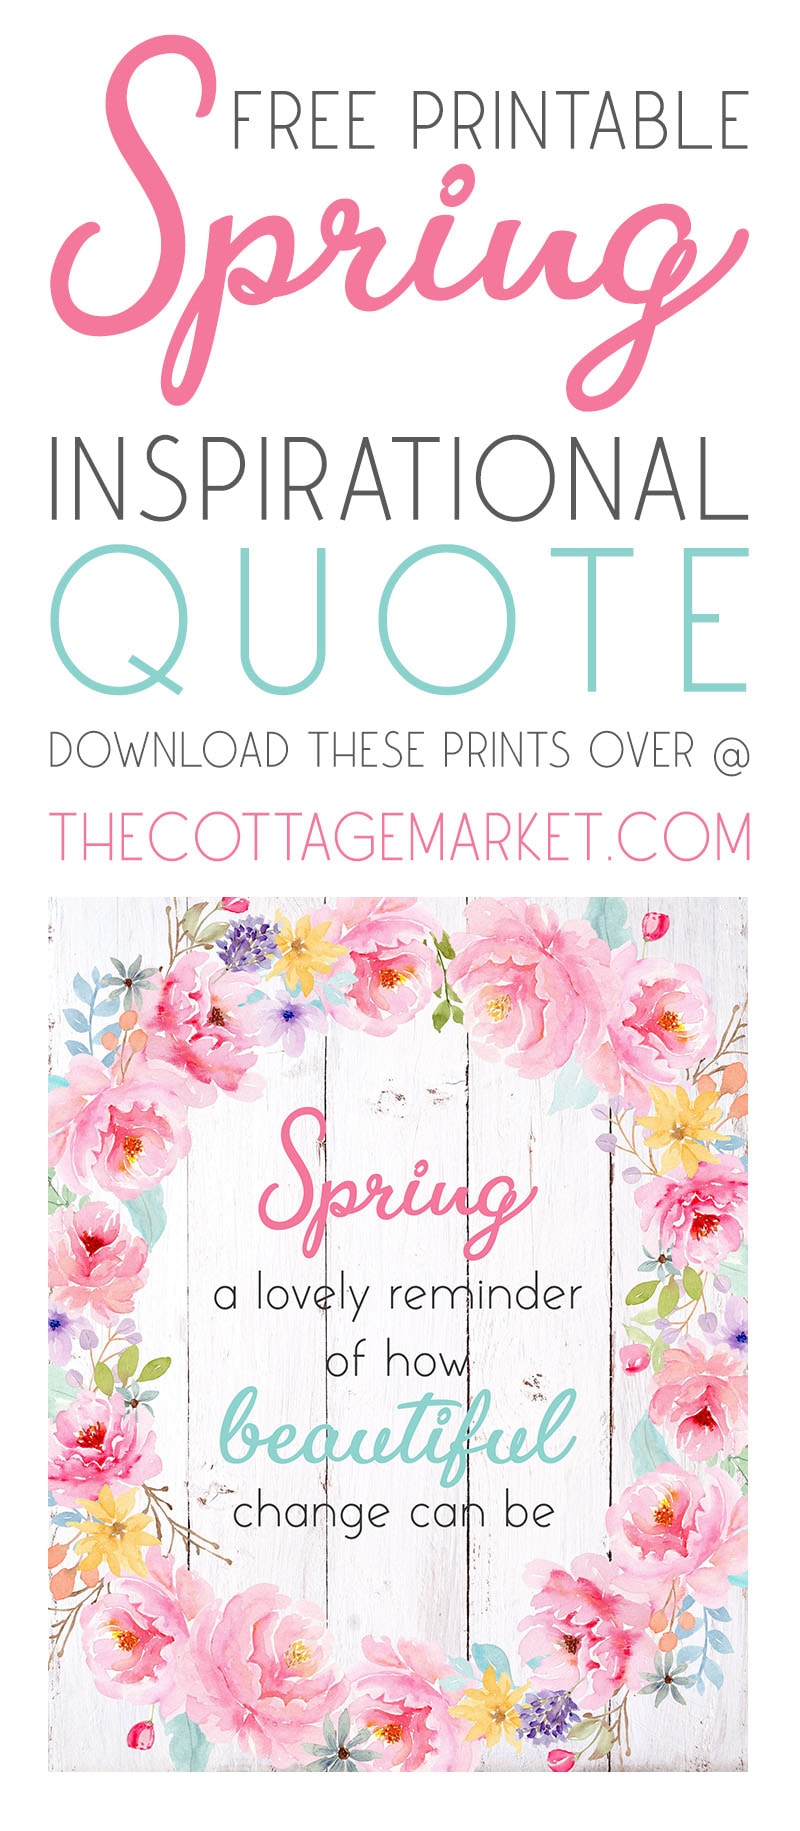 This Free Printable Spring Inspiration Quote is going to look totally fabulous and fresh on you wall or as part of your wall gallery and more.  It's cheery and a great way to celebrate the Season!